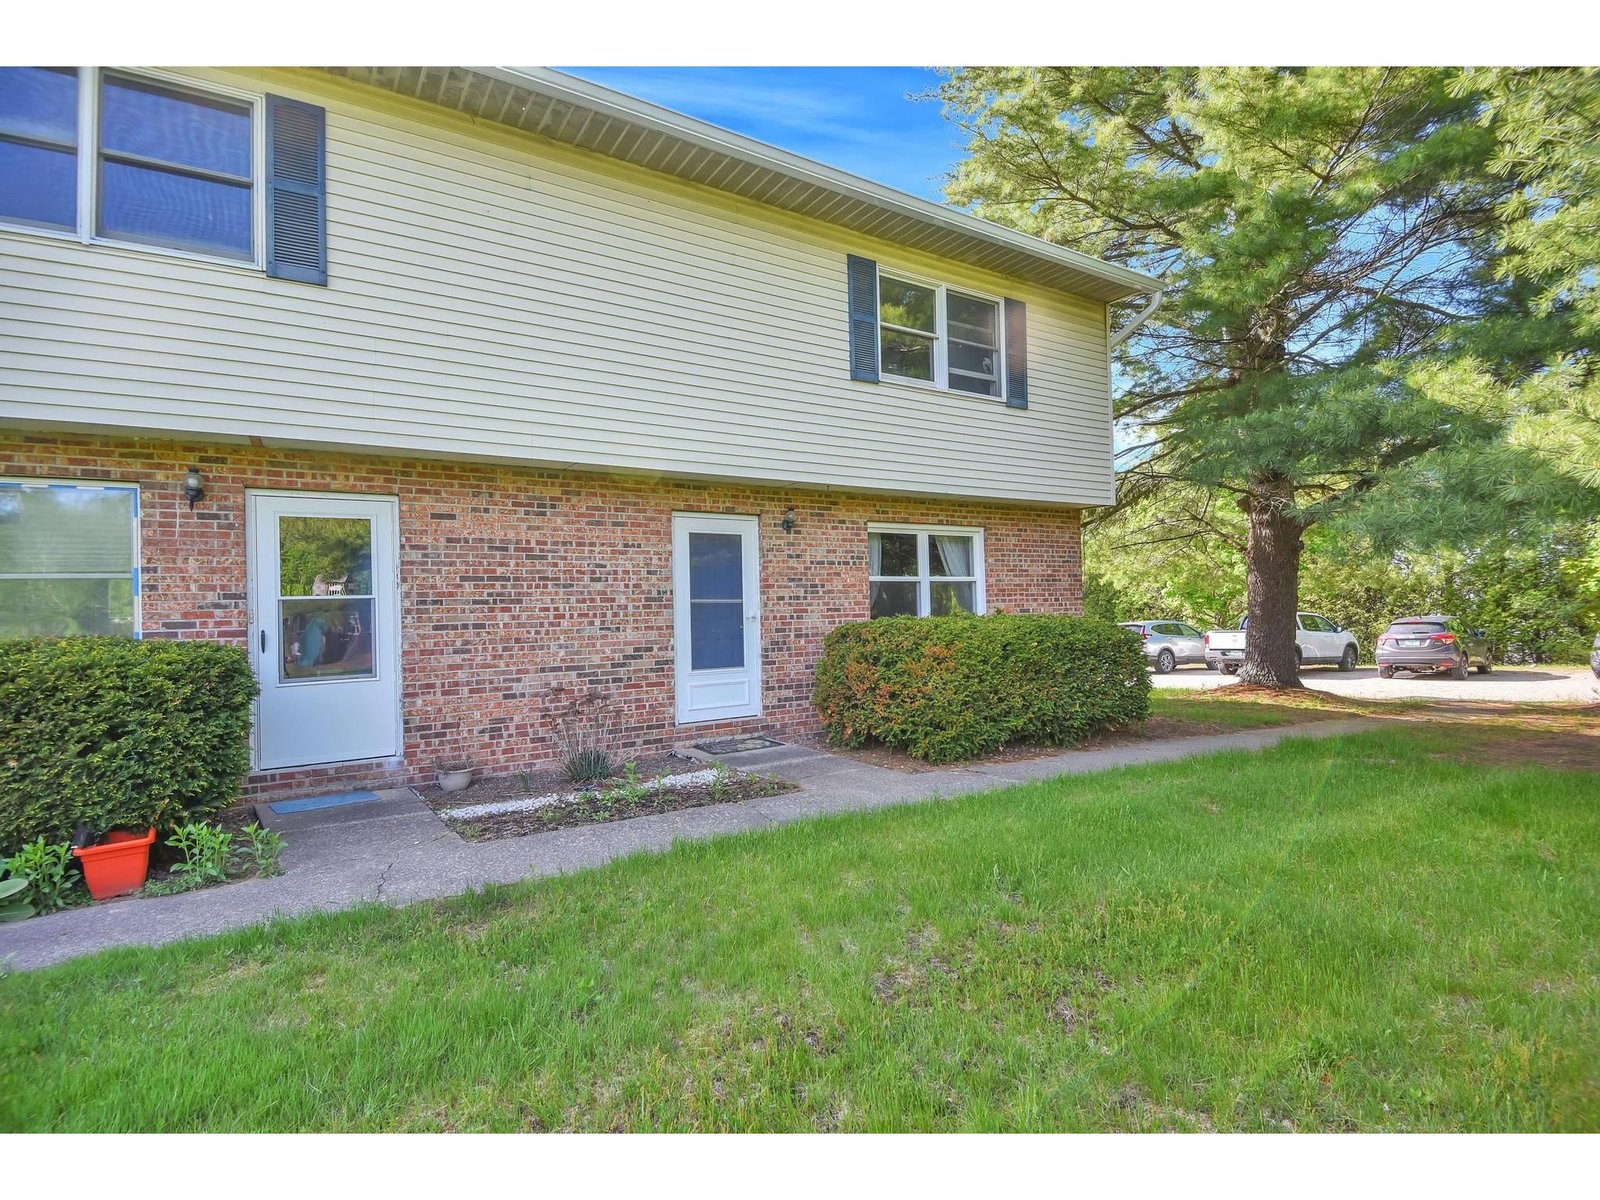 Sold property in Williston